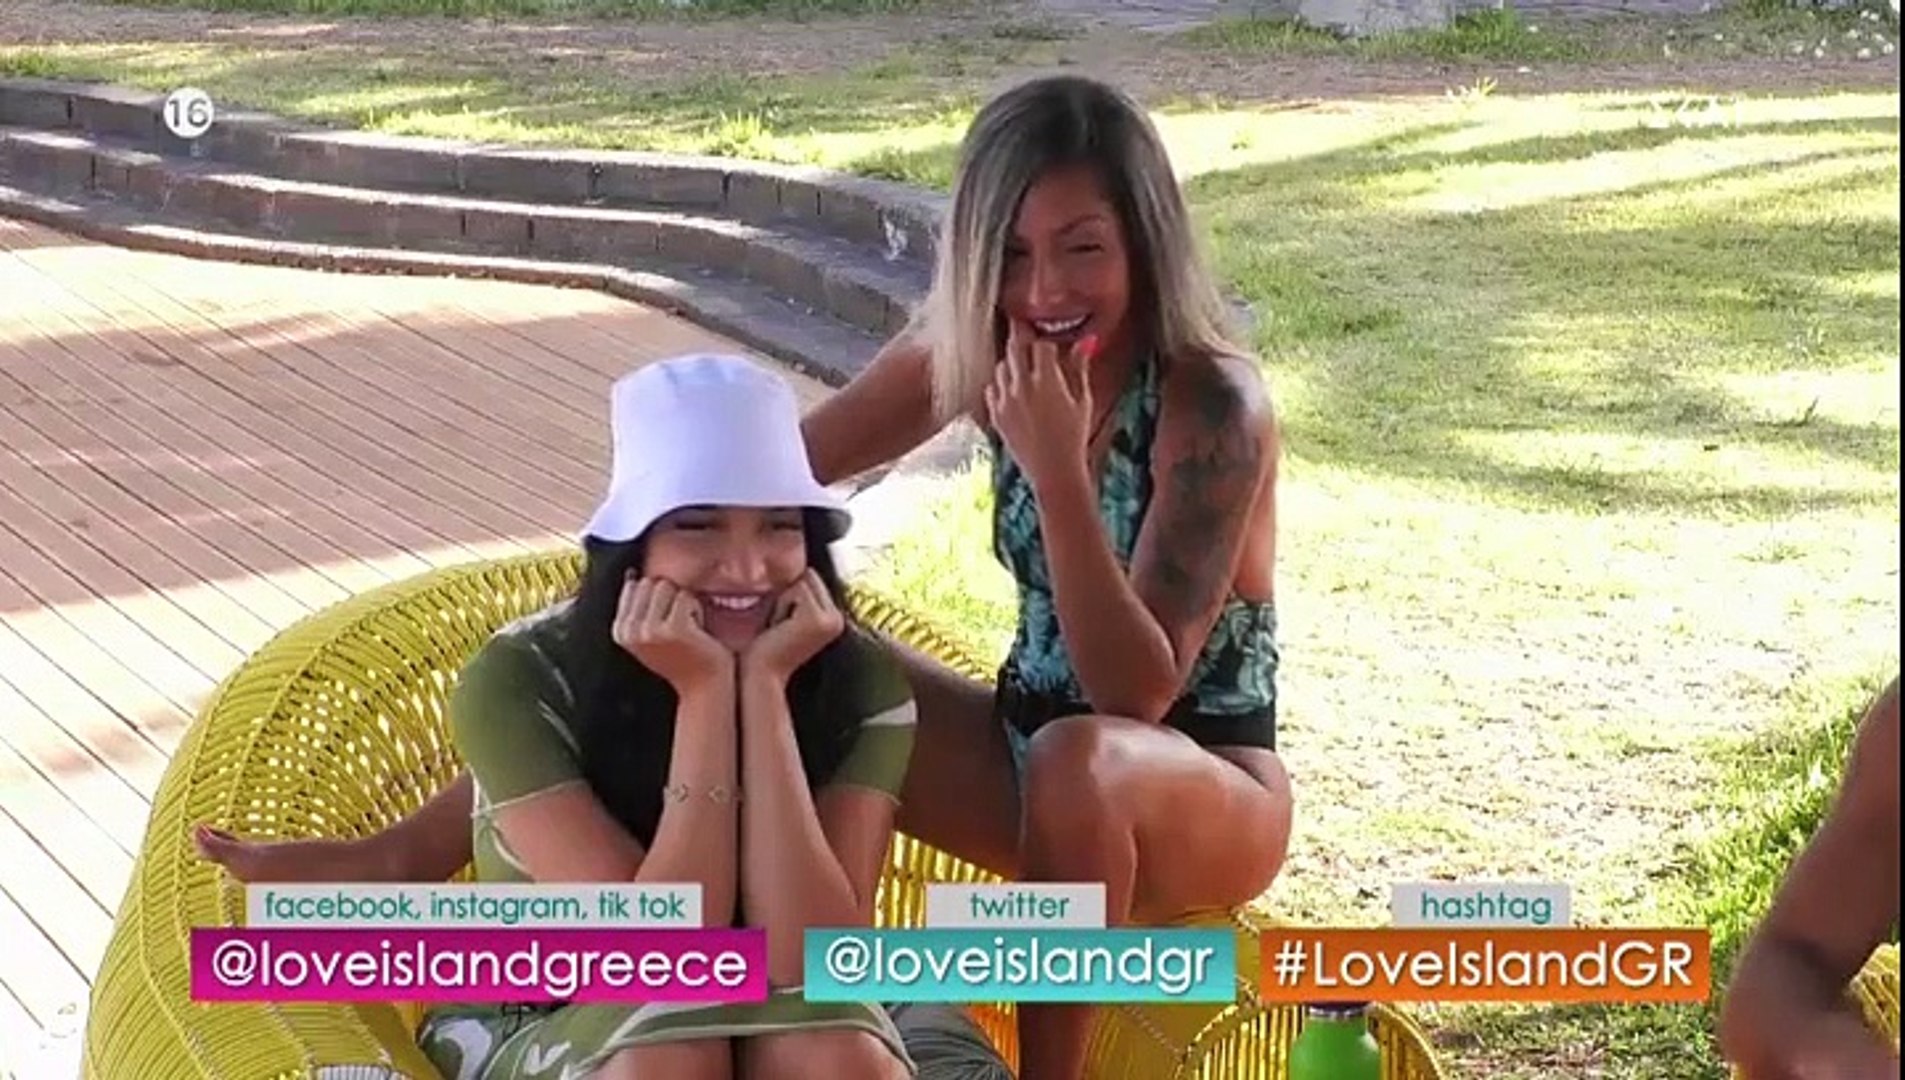 Love island games episode 22 dailymotion